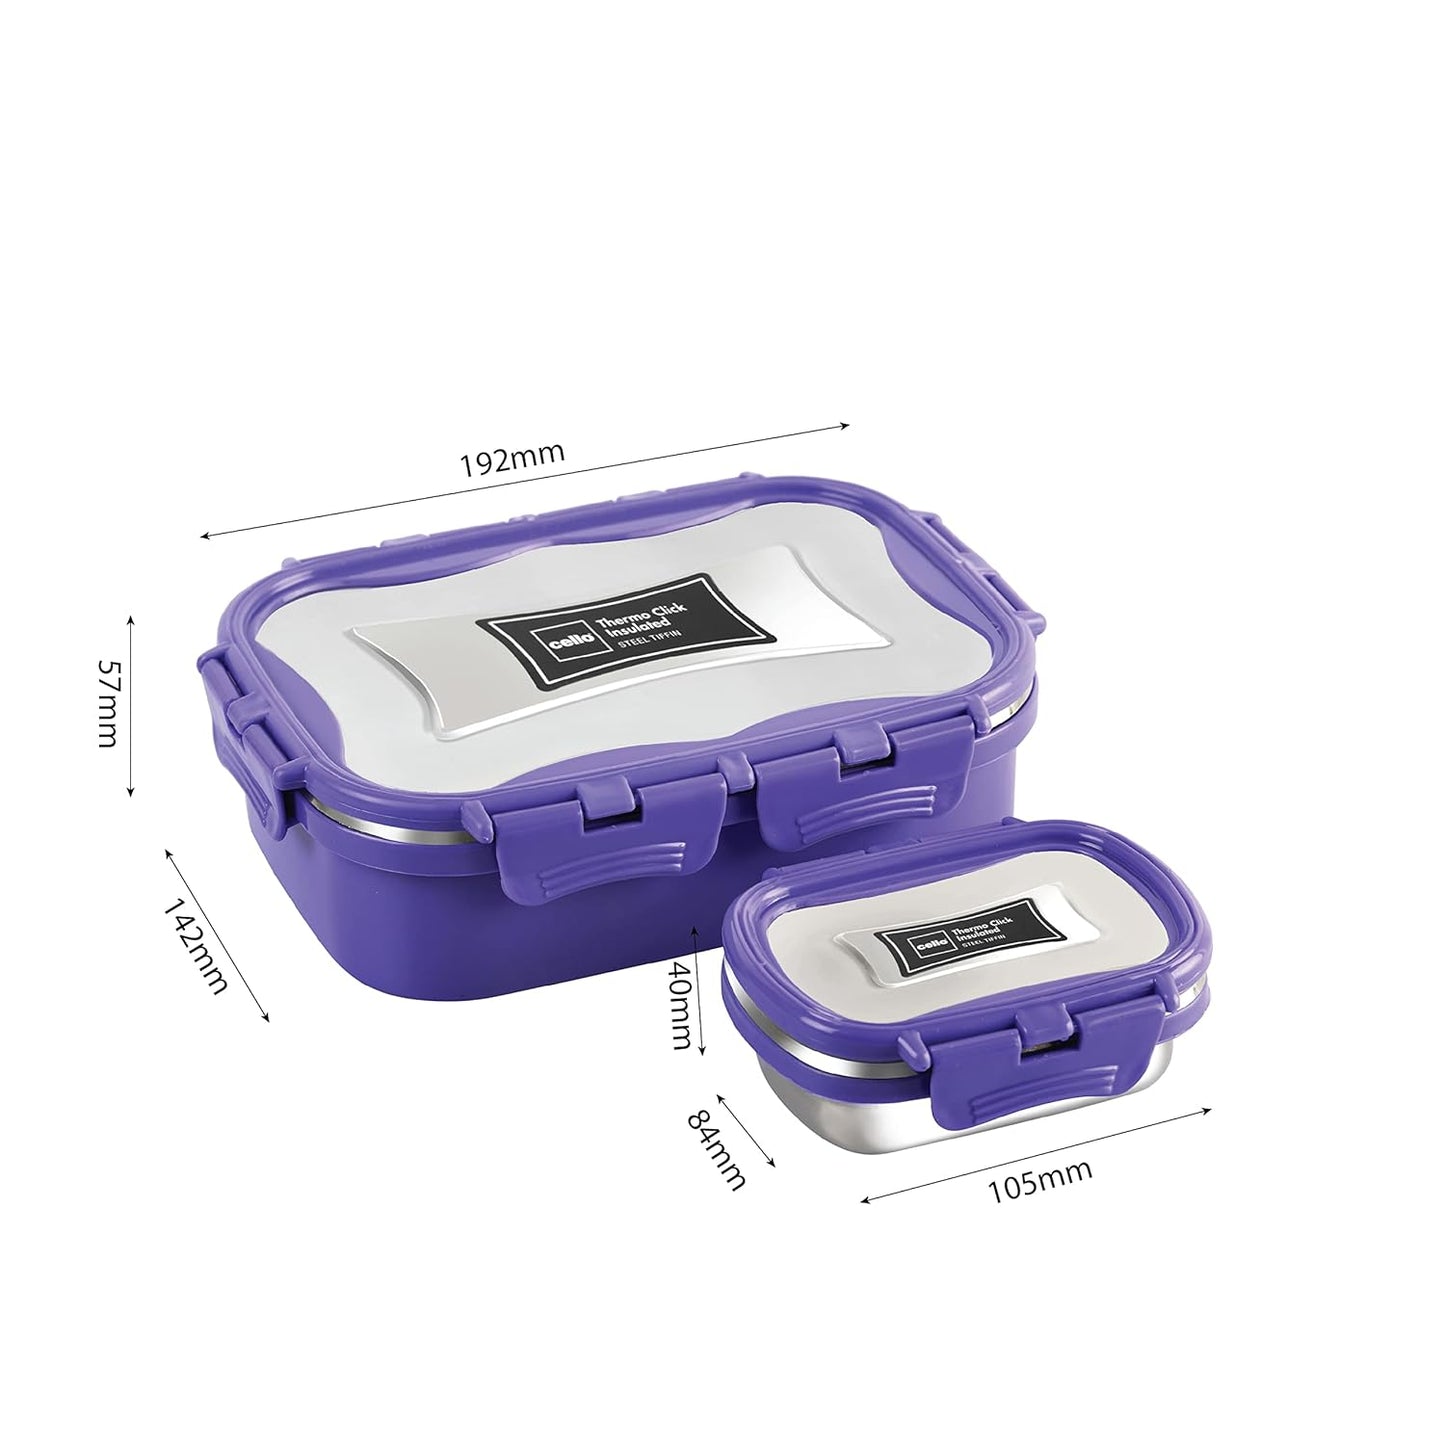 CELLO Thermo Click Stainless Steel Small Lunch Box Tiffin Box